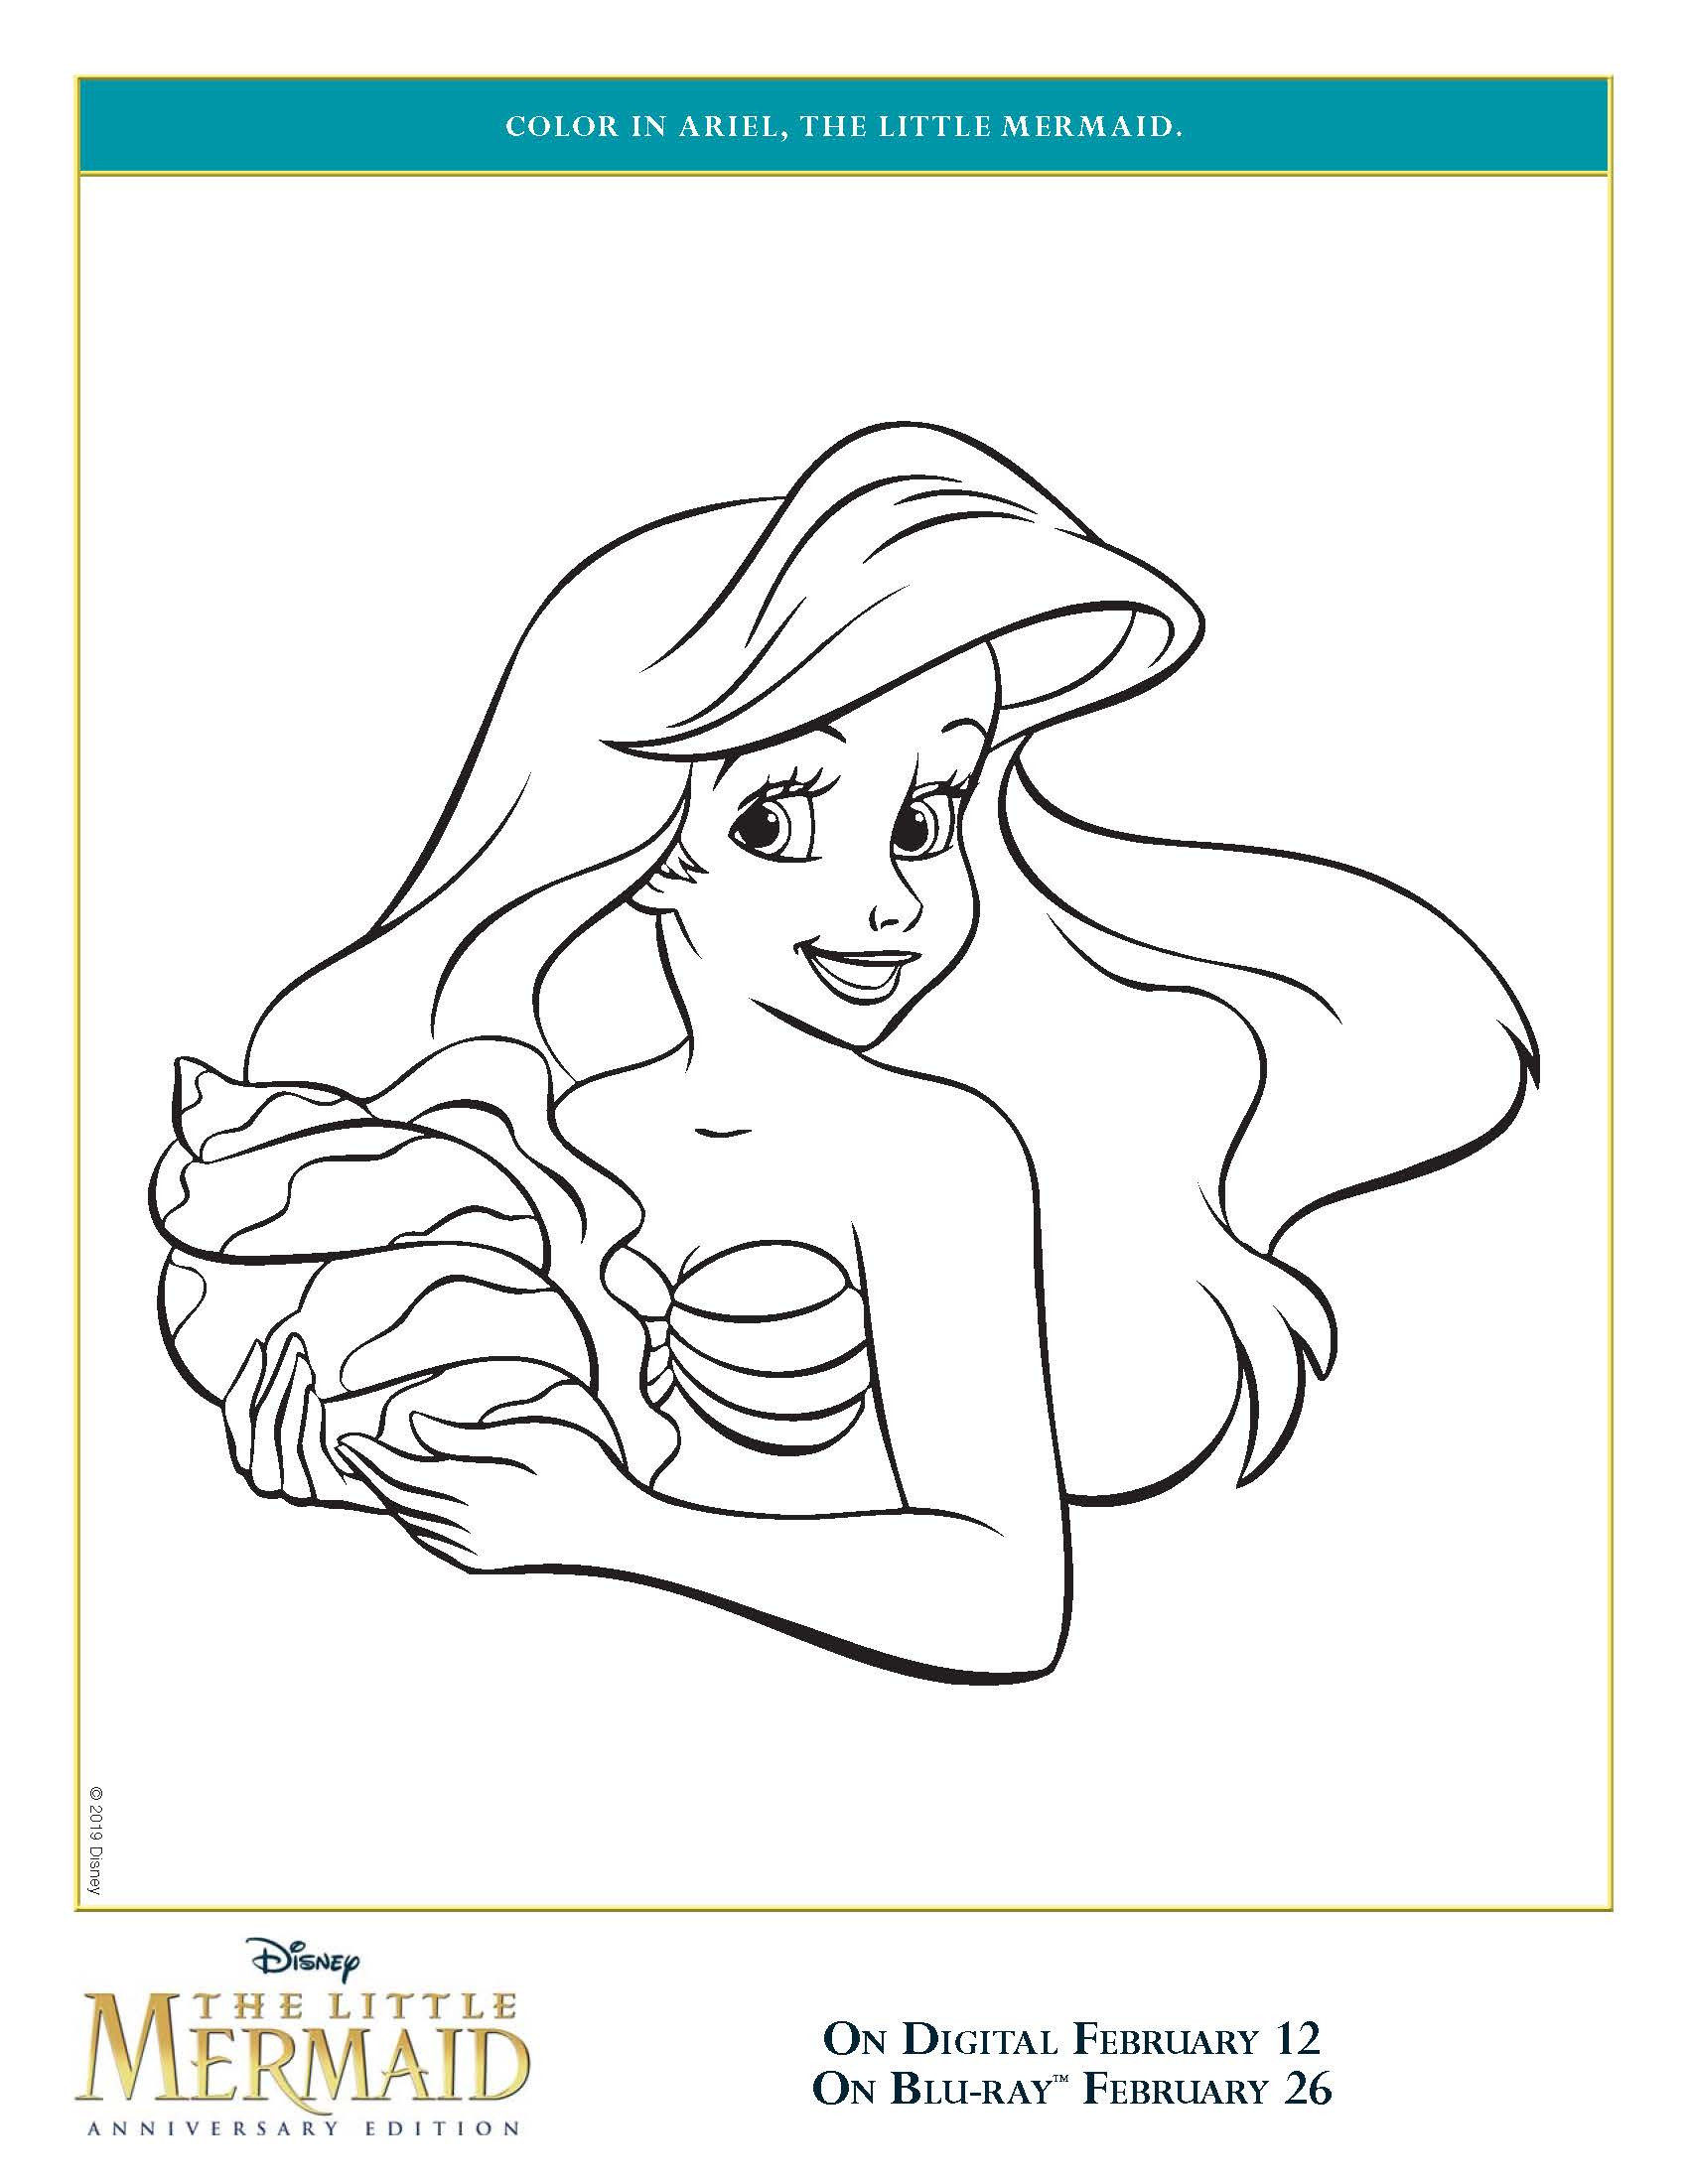 Ariel Printable Coloring Pages
 The Little Mermaid Coloring sheets Highlights Along the Way